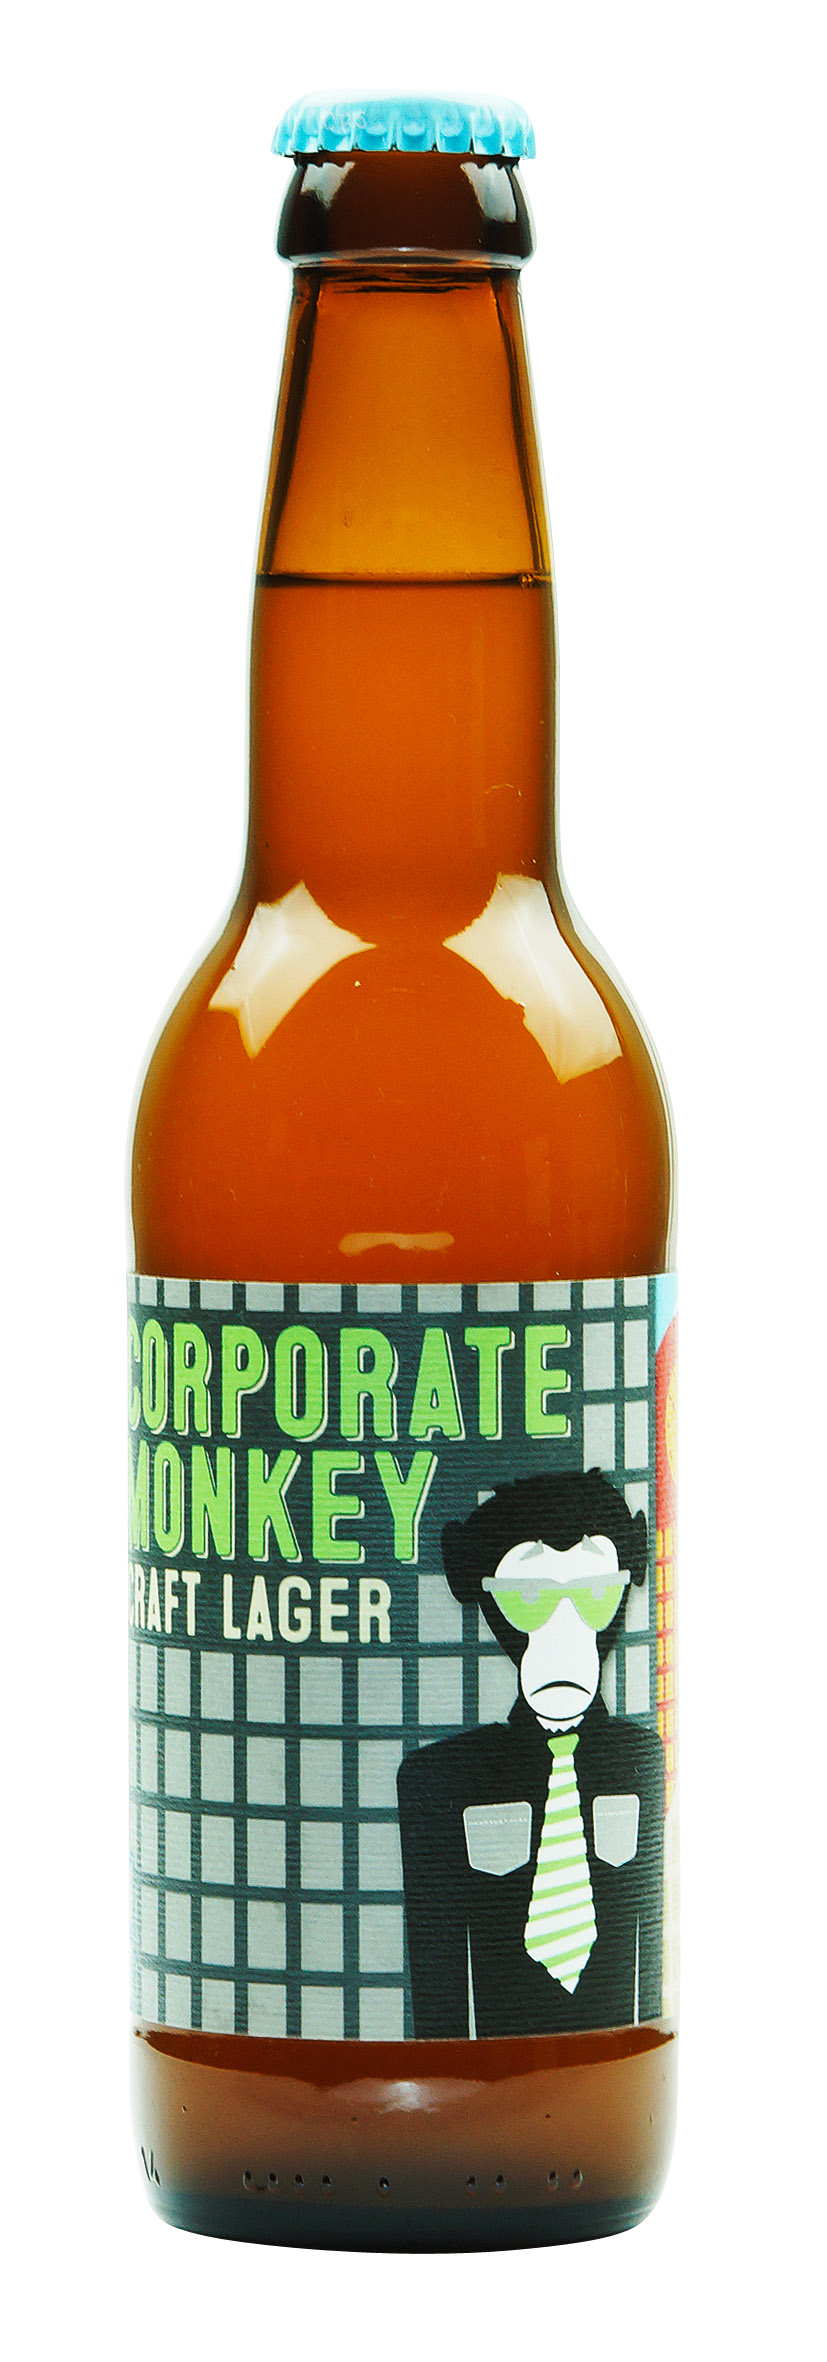 Corporate Monkey Craft Lager 0